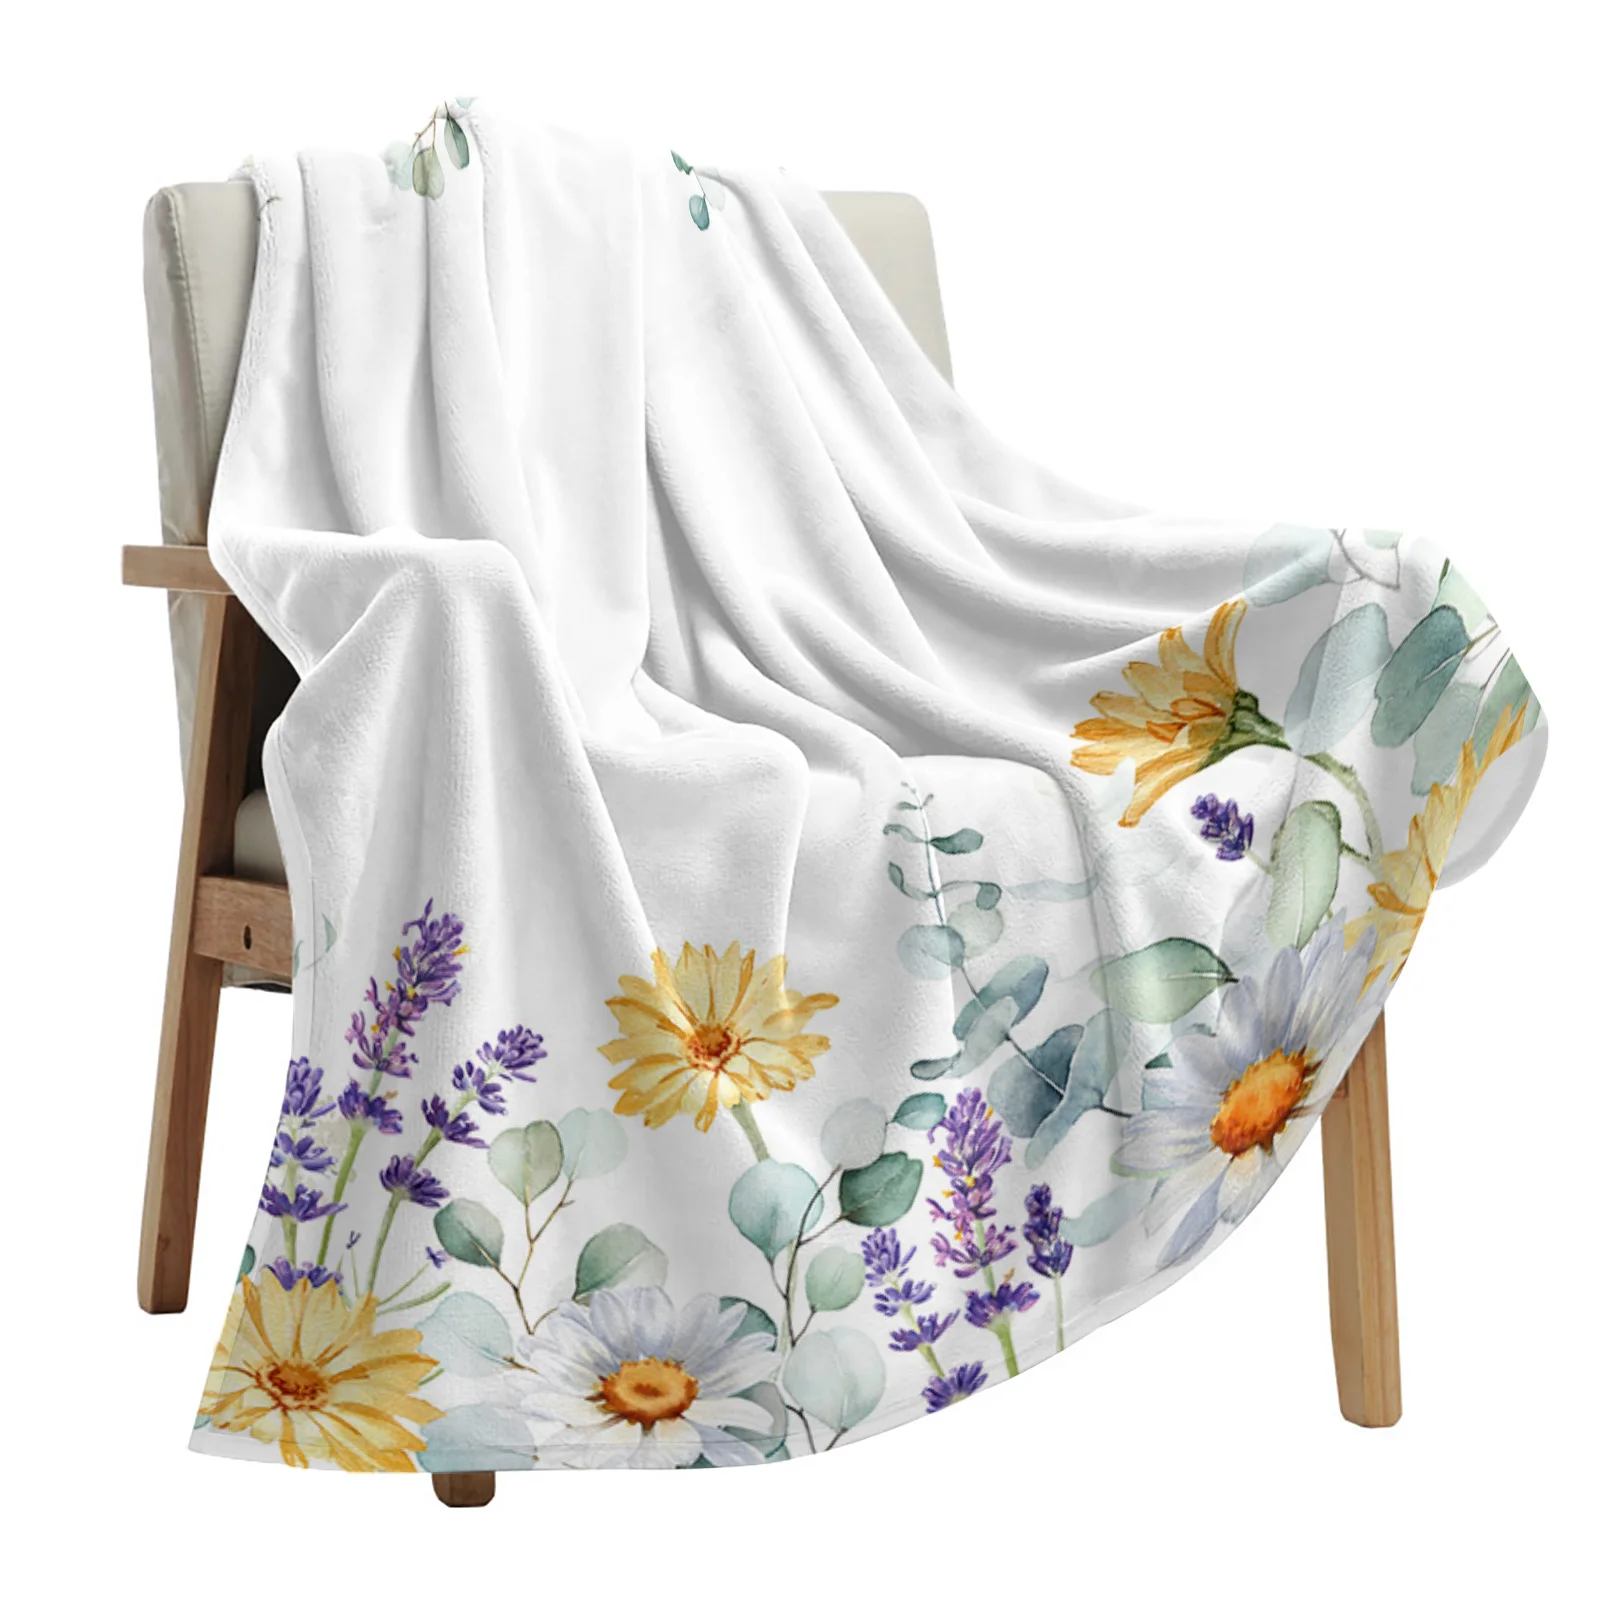 

Idyllic Eucalyptus Daisy Lavender Butterfly Throws Blankets for Sofa Bed Winter Soft Plush Warm Sofa Throw Blanket Holiday Gifts